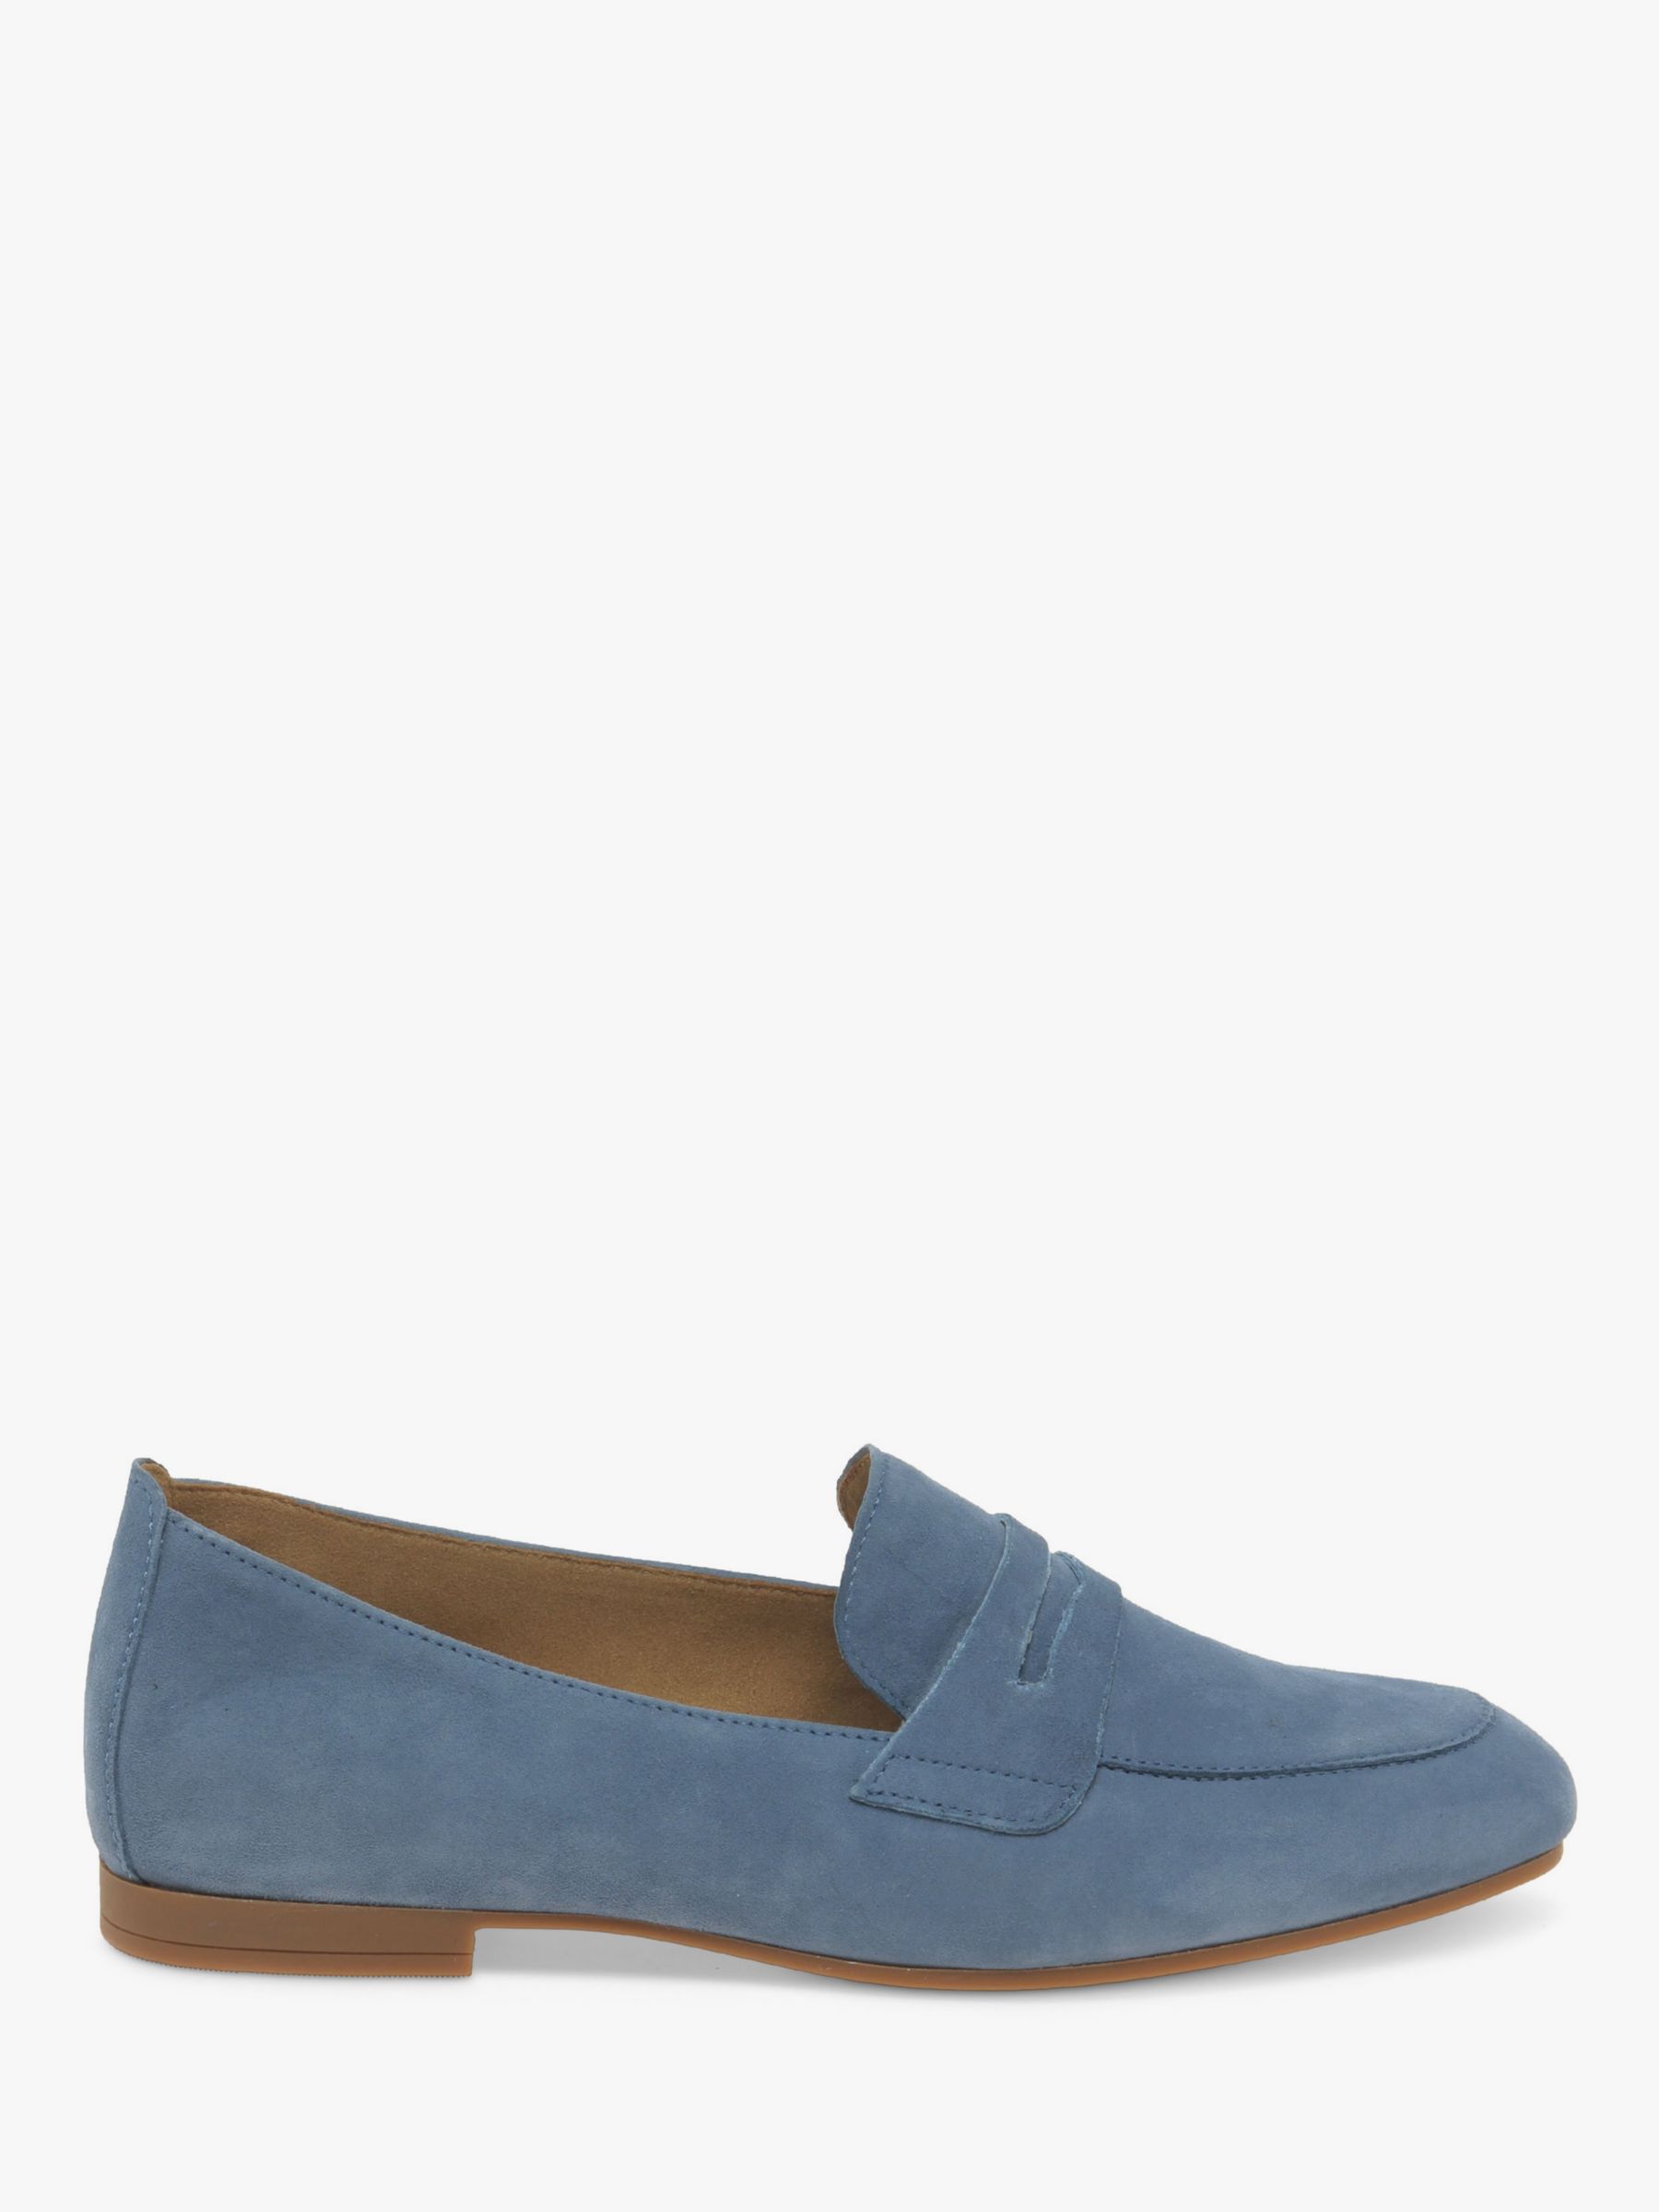 Gabor Viva Suede Loafers, Blue at John Lewis & Partners